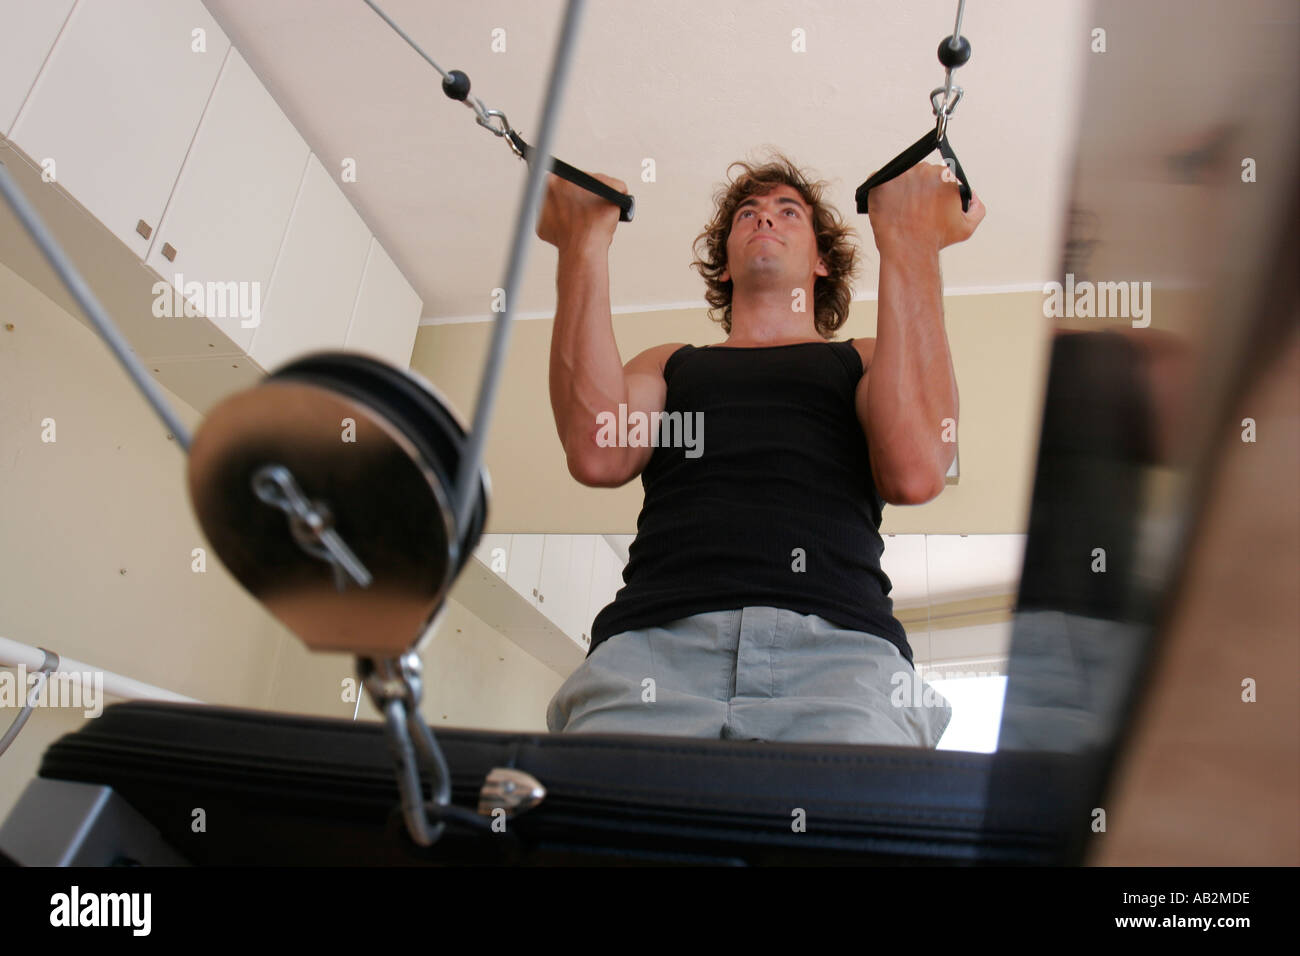 young man working out on exercise machine Stock Photo